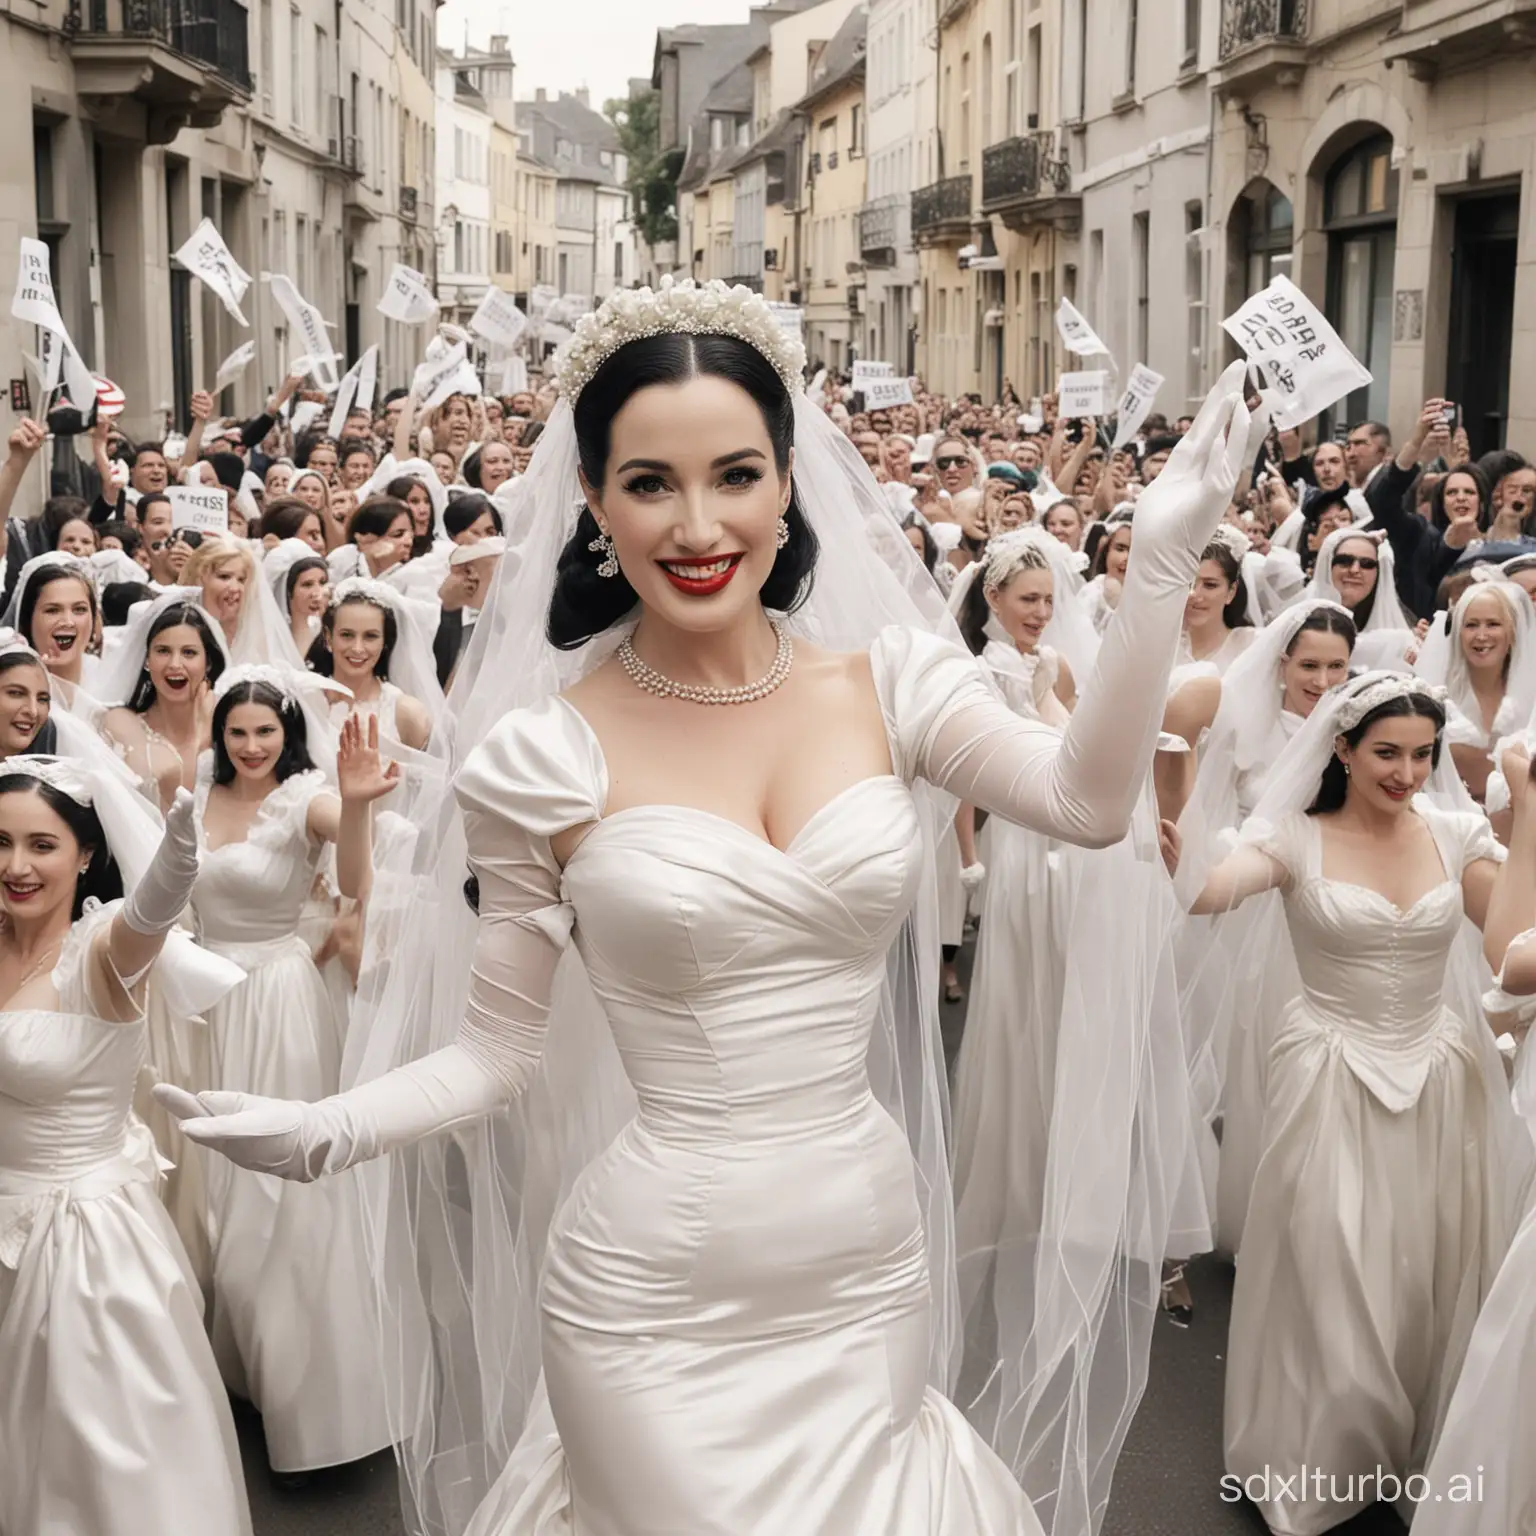 Crowd of dita von tesse dressed as a bride with veil and wreath with white glove waving flag and distributing flyers in the campaign of candidate dita von tesse dressed as a bride with veil and wreath with white glove number 30